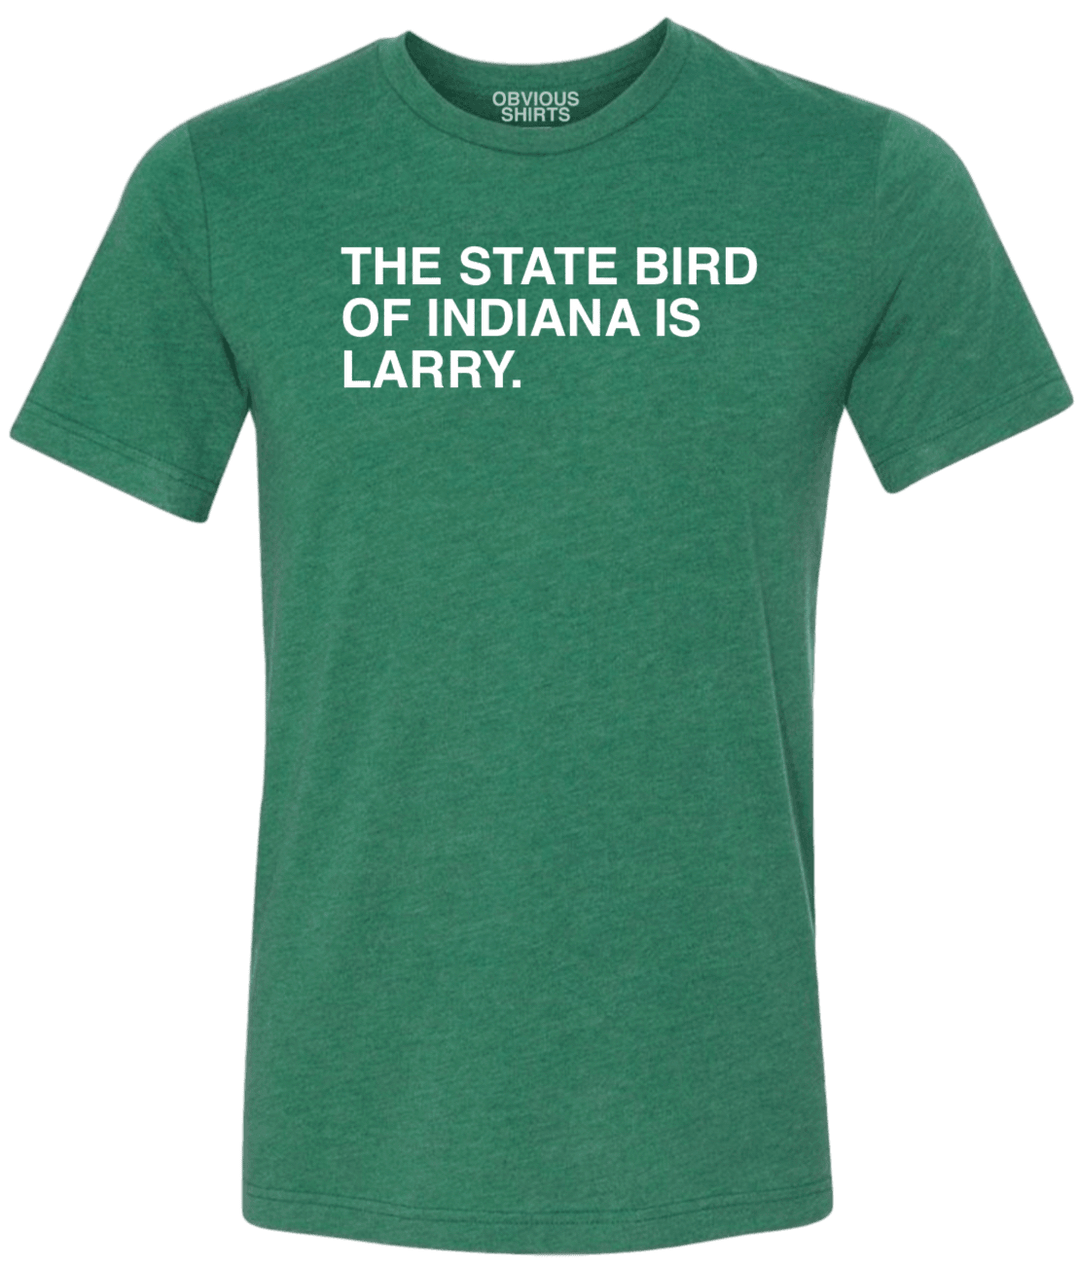 THE STATE BIRD OF INDIANA IS LARRY. (BOSTON) - OBVIOUS SHIRTS.